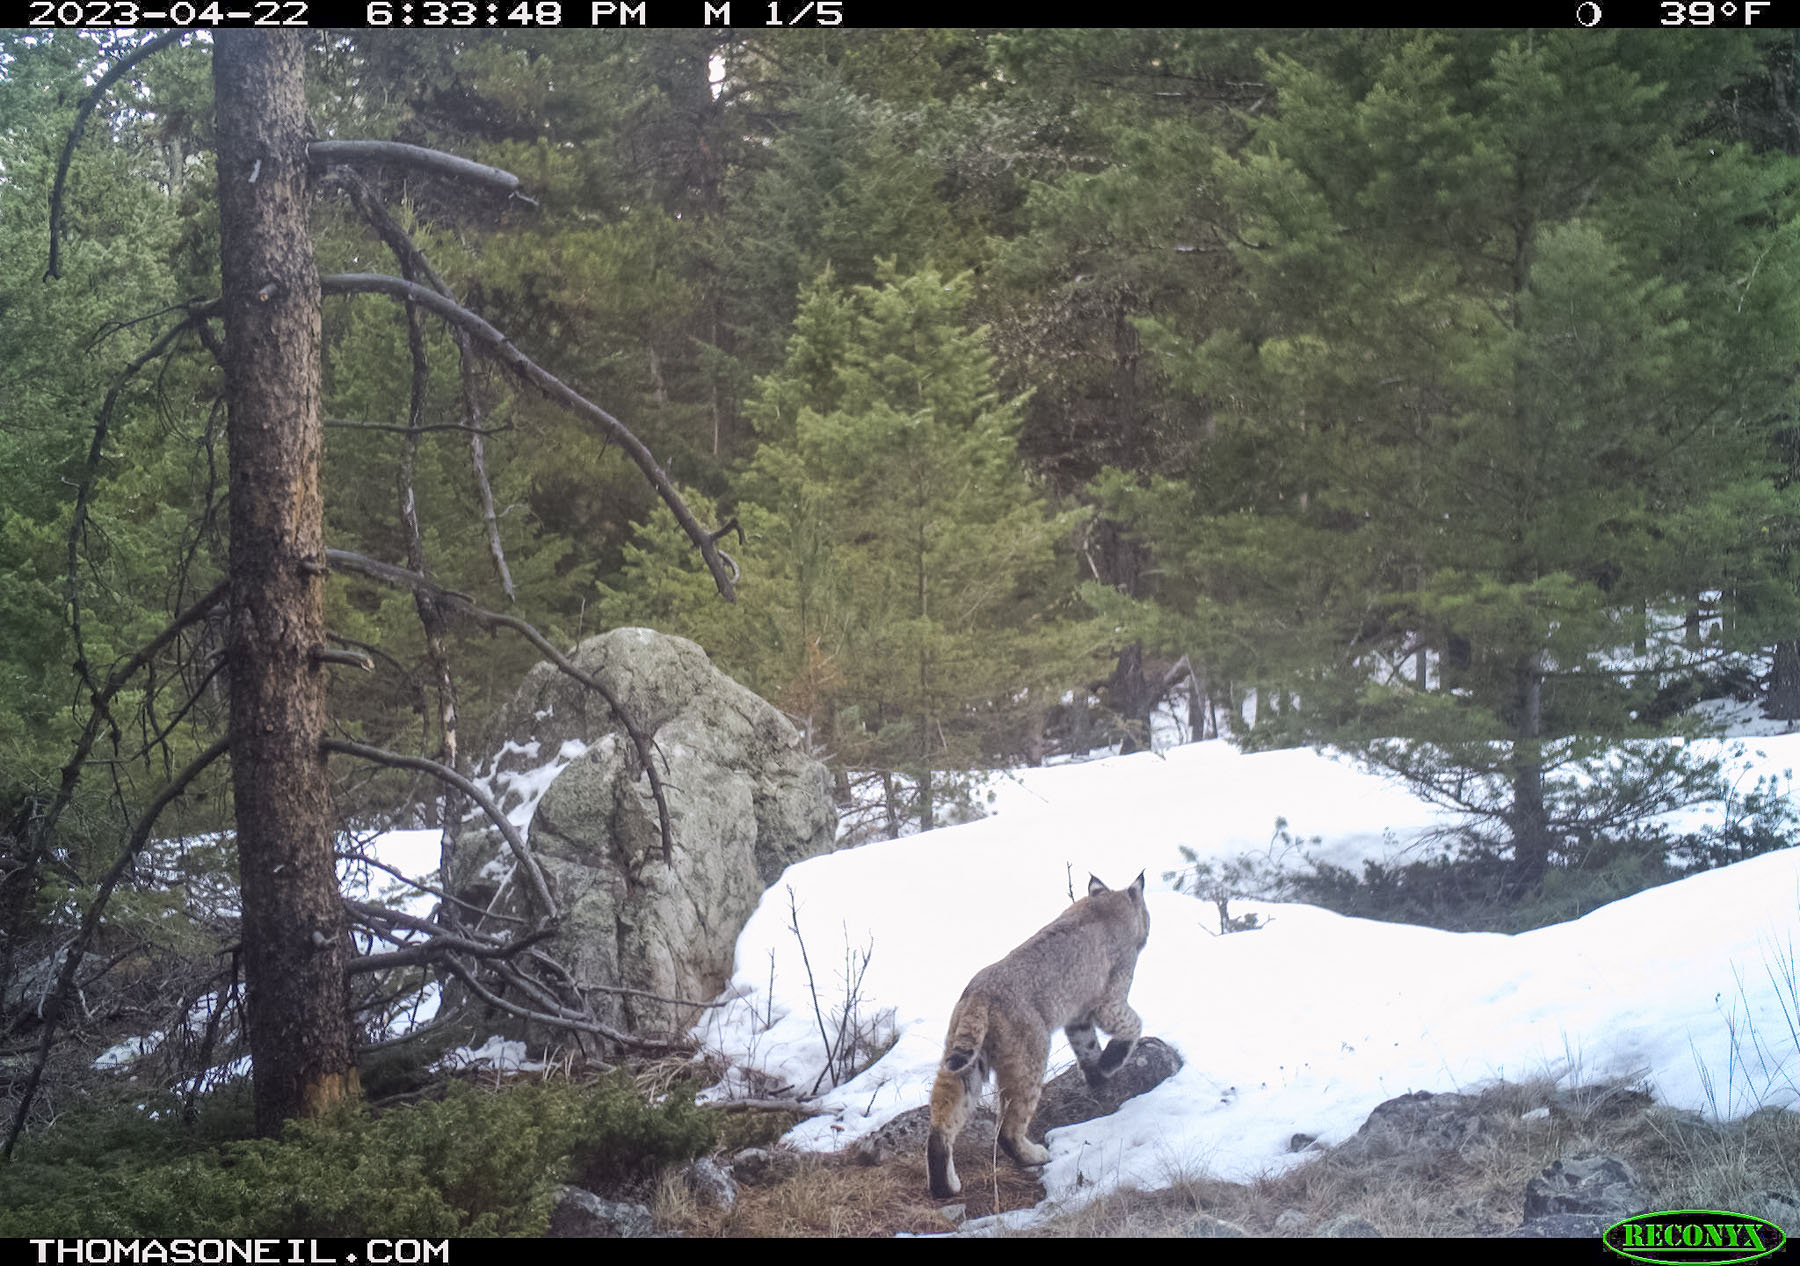 Ive gotten bad images of bobcats before but havent posted one here before.  Click for next photo.